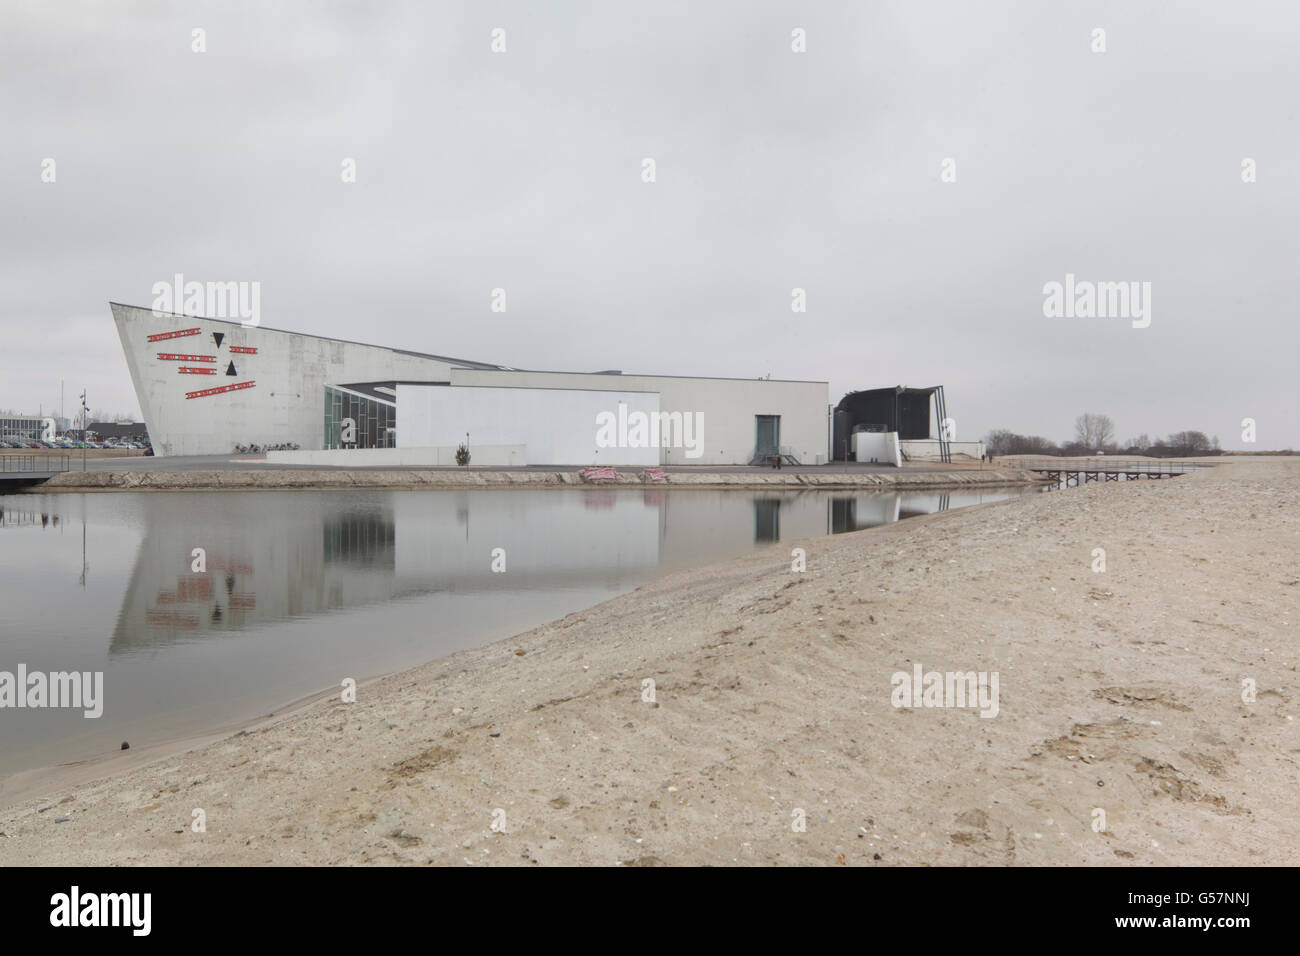 Exterior view with sand dunes and lagoon against cloudy sky (prior ...